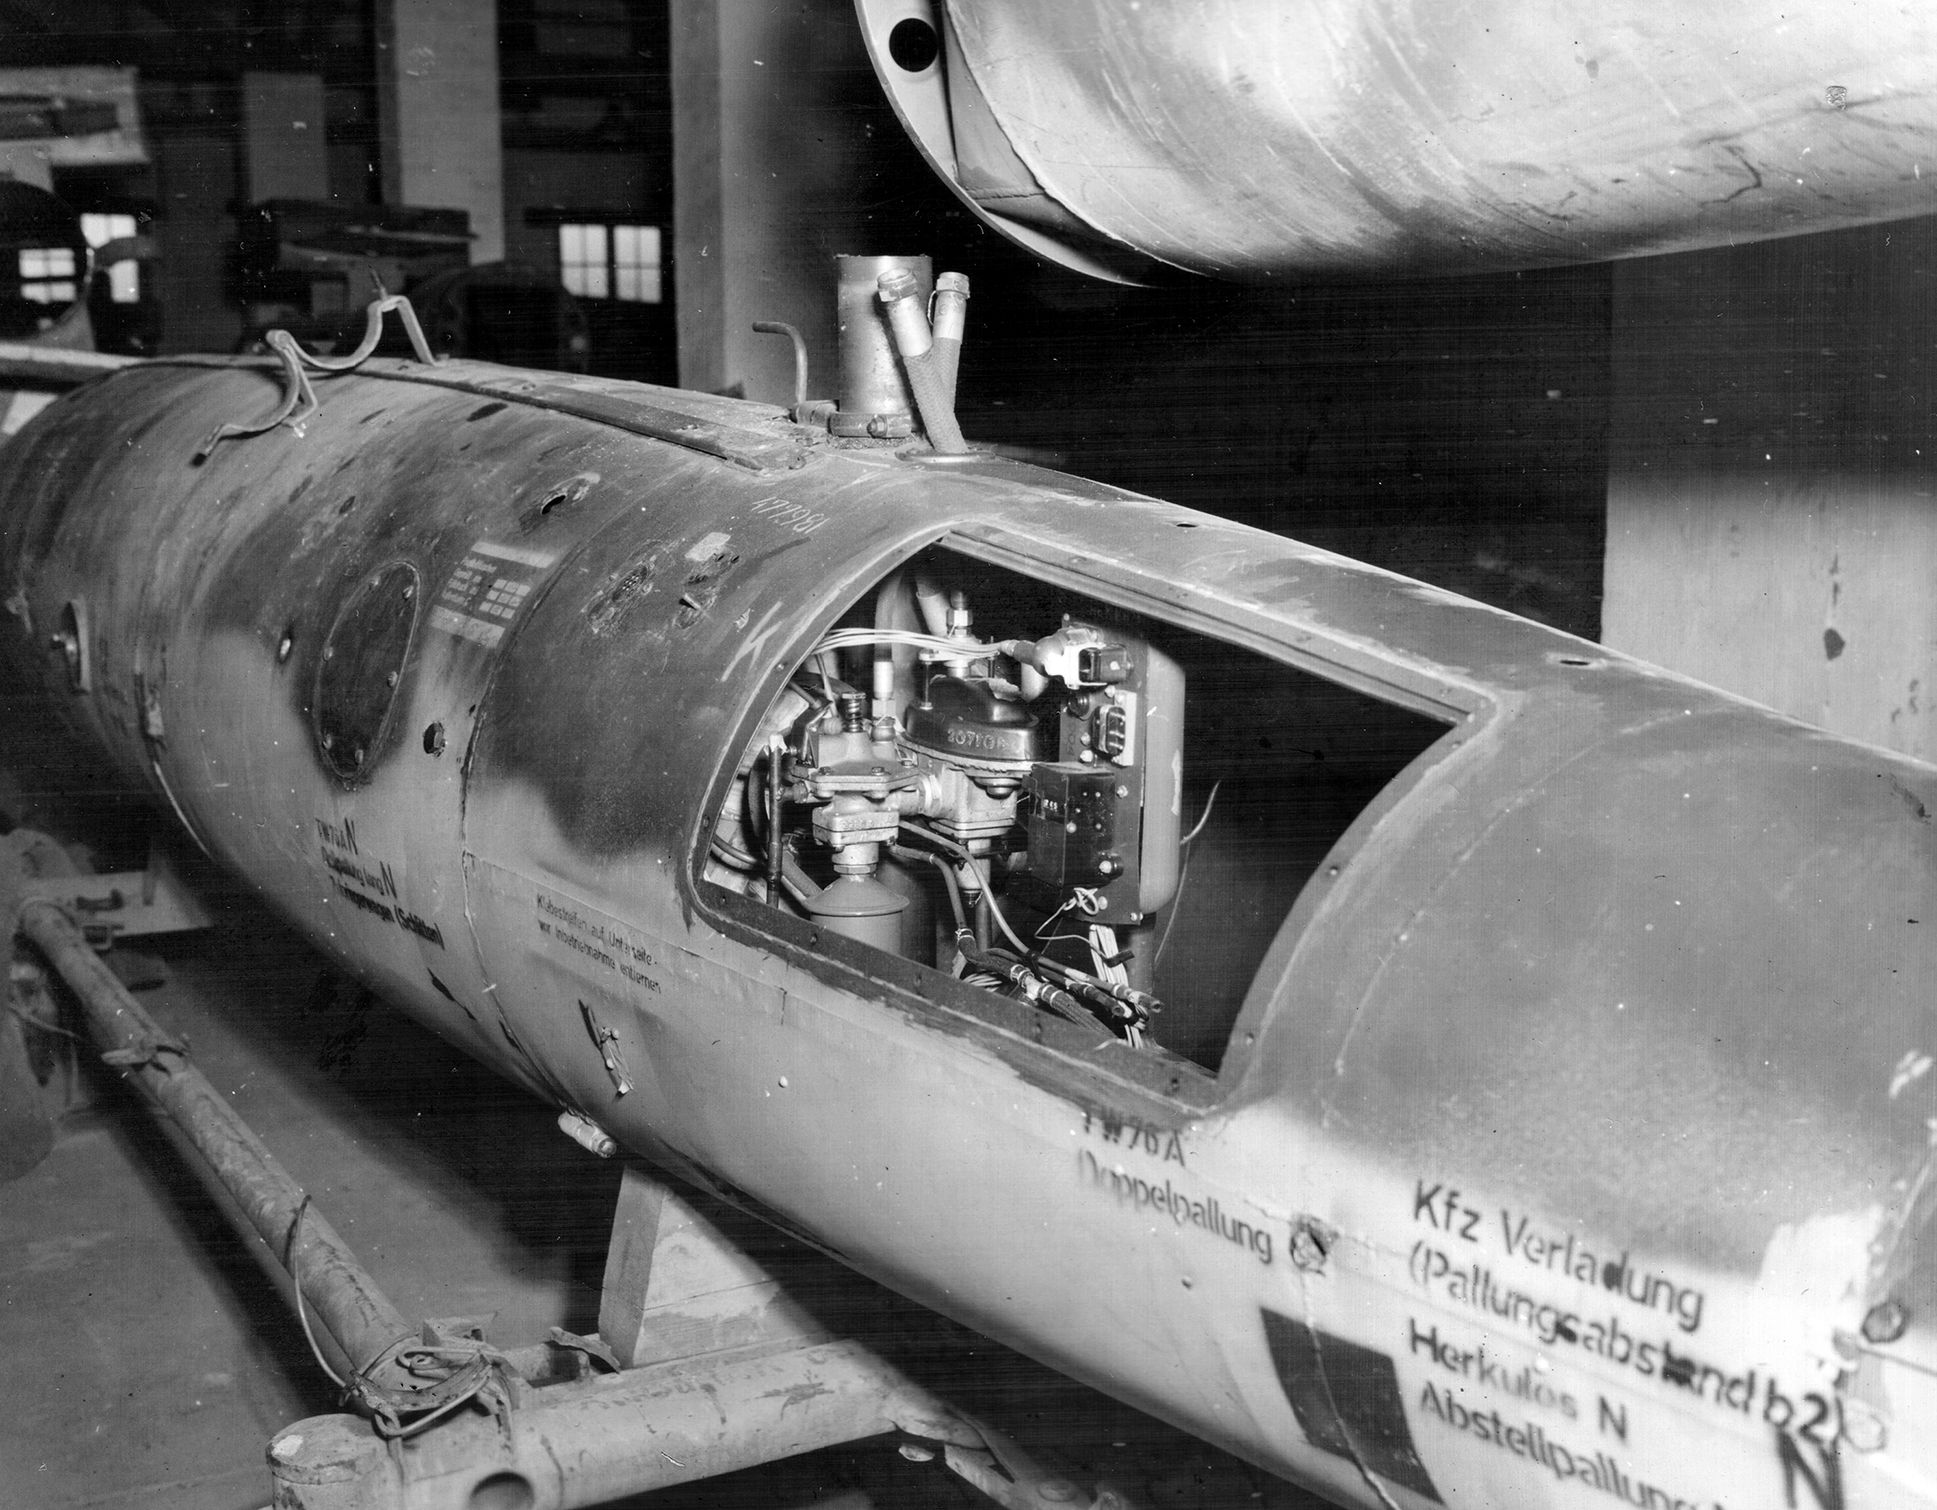 A captured V-1 Buzz Bomb is shown at the assembly plant at Nordhausen. The complex was sprawling, encompassing some three square miles with 85 buildings and camouflaged roads. U.S. personnel were in a race against time to bring Nazi rocket technology to the United States during Operation Paperclip.